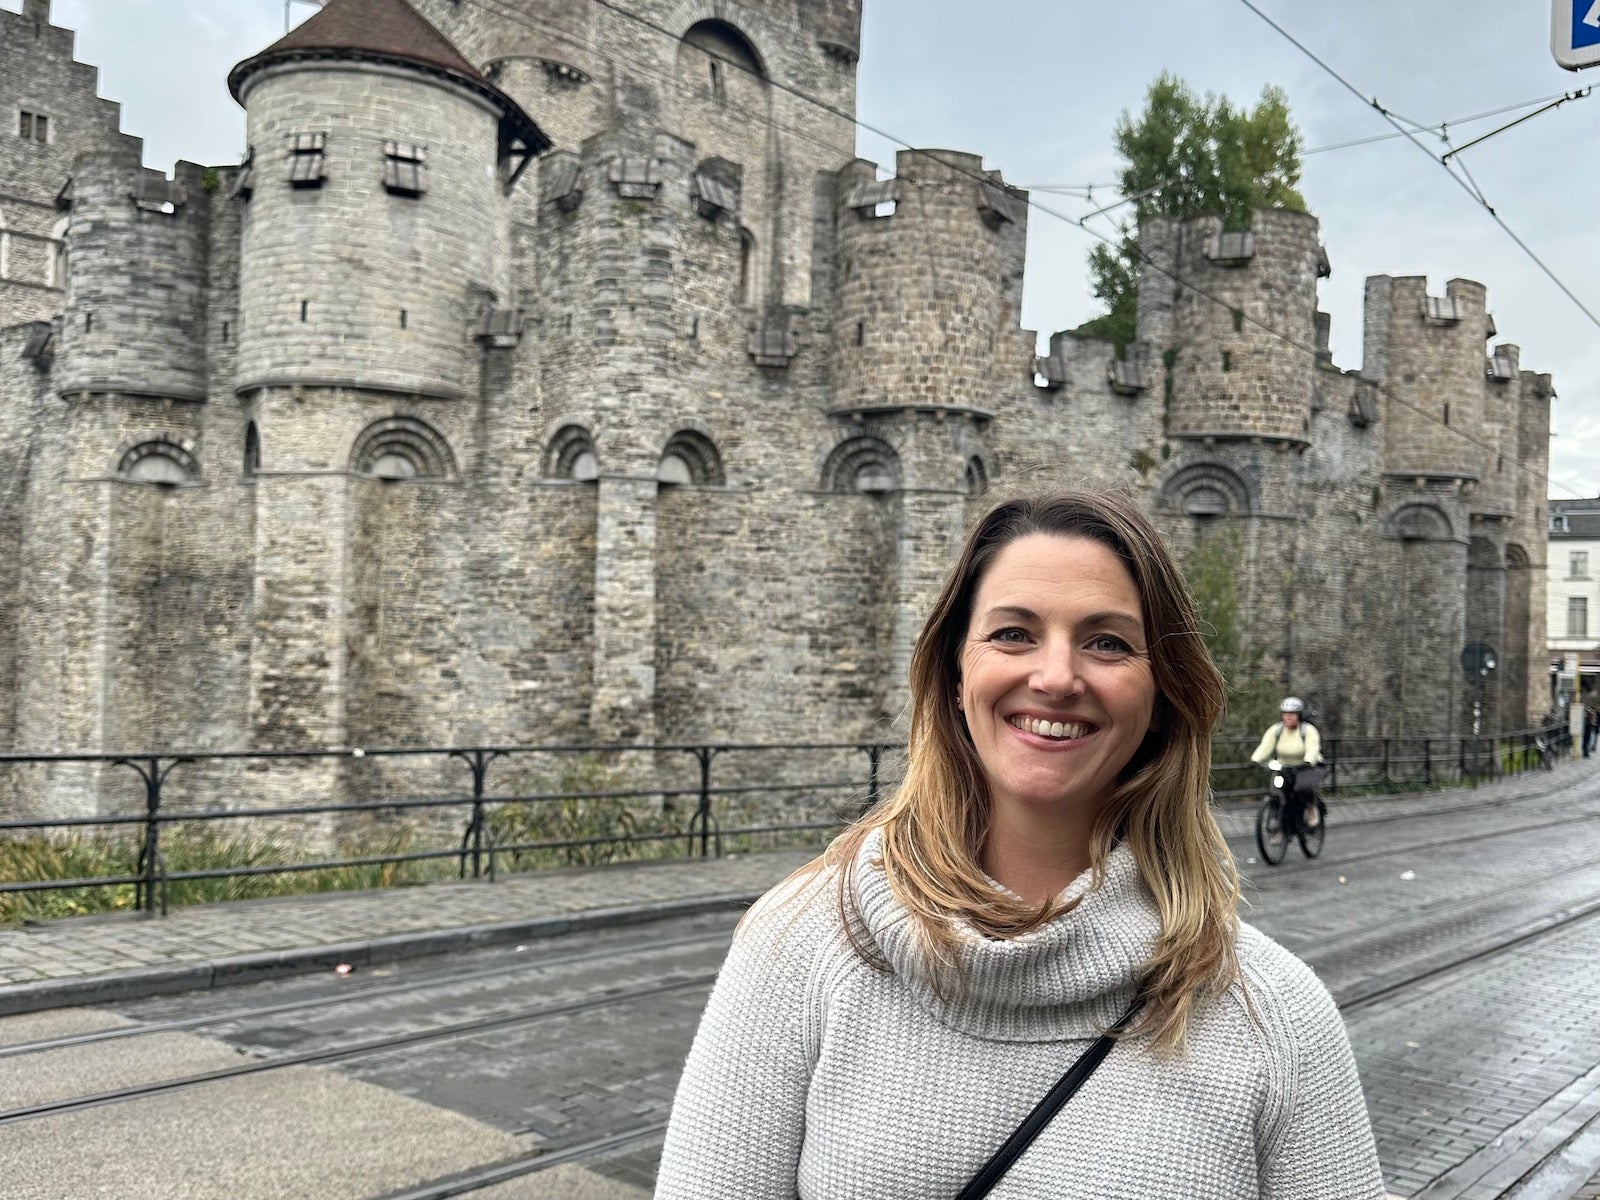 Woman standing outside castle in Ghent